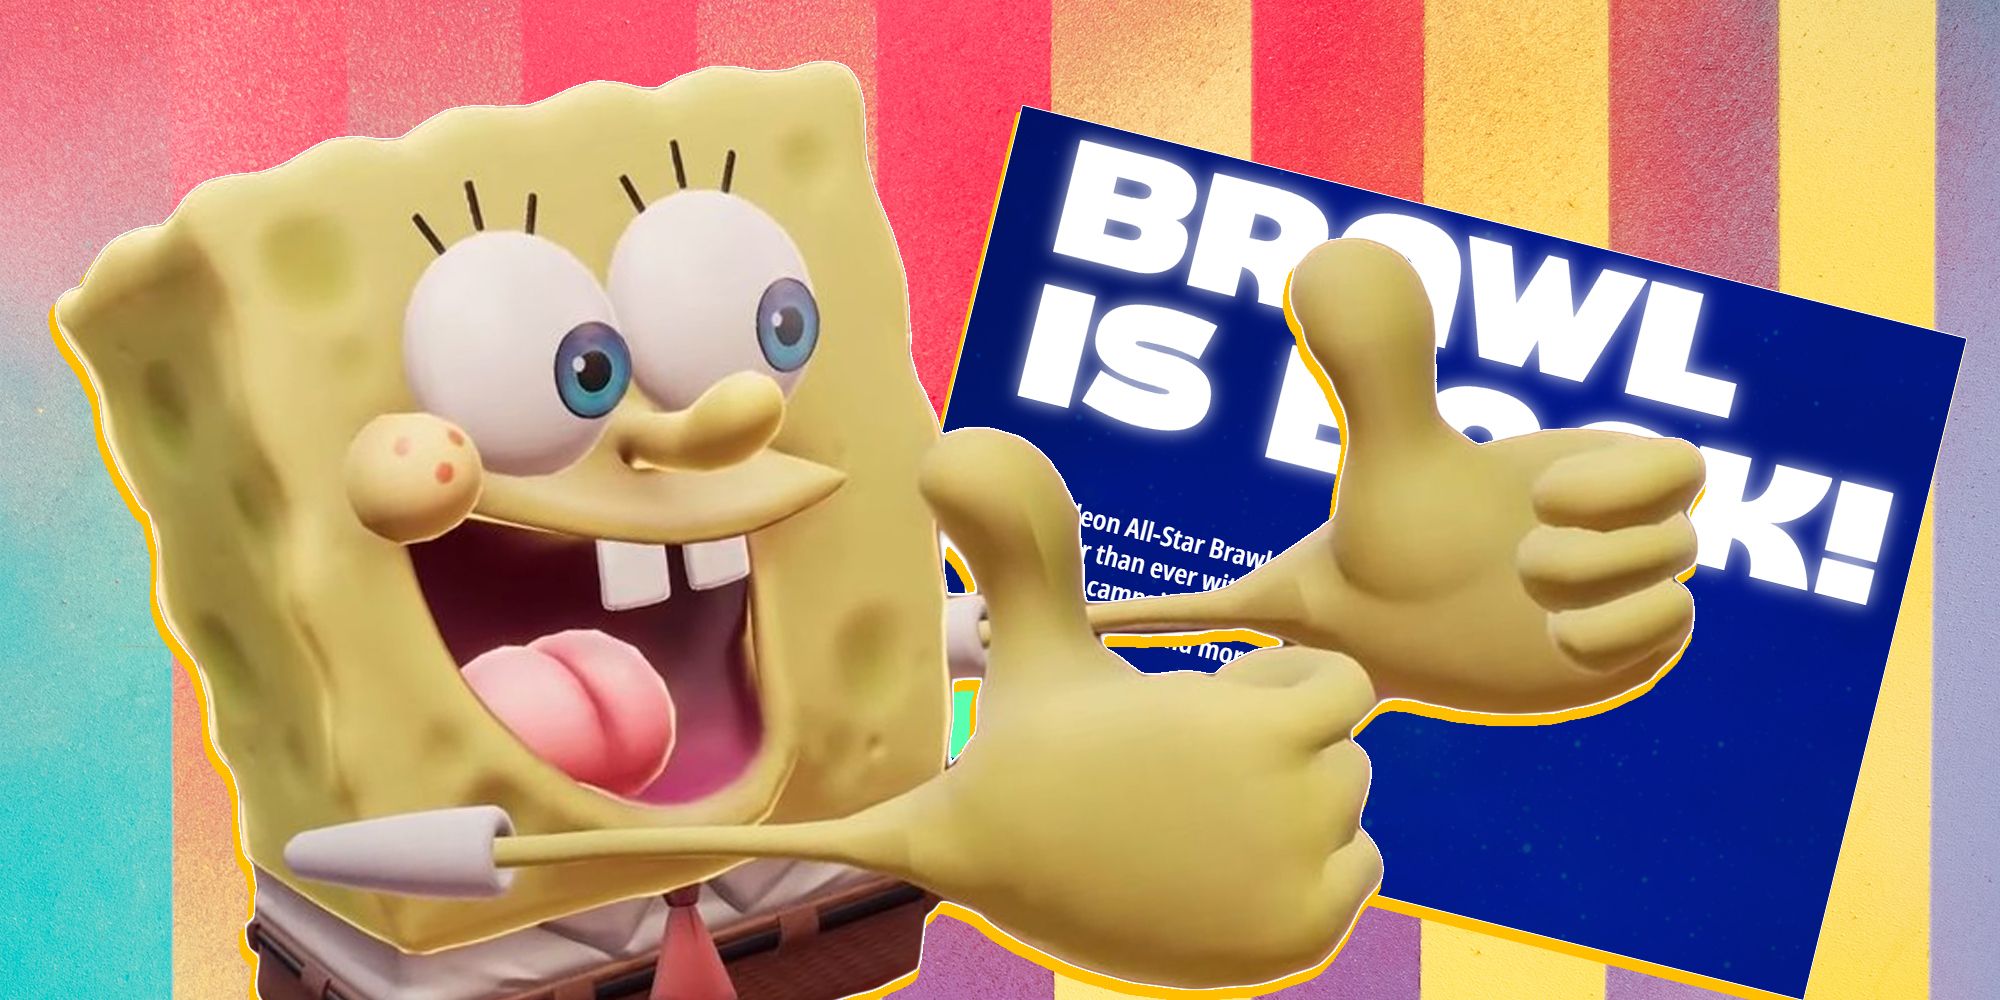 spongebob giving a double thumbs up to a brawl is back message